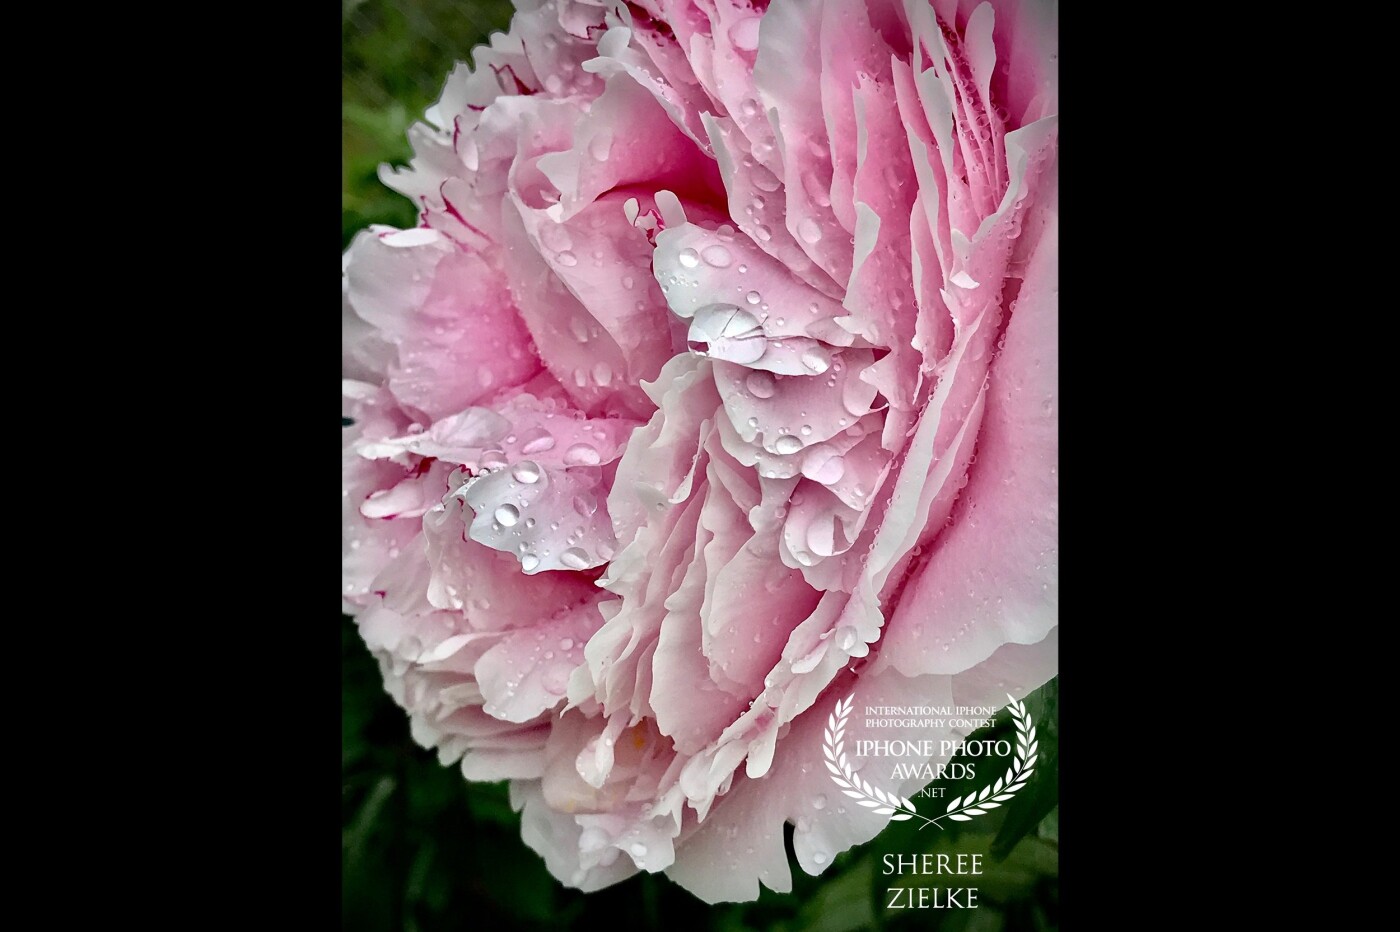 Raindrops on roses, er, on peonies. An abundance of rain in our Canadian city is making my garden very healthy. My peonies are the size of dishes. 